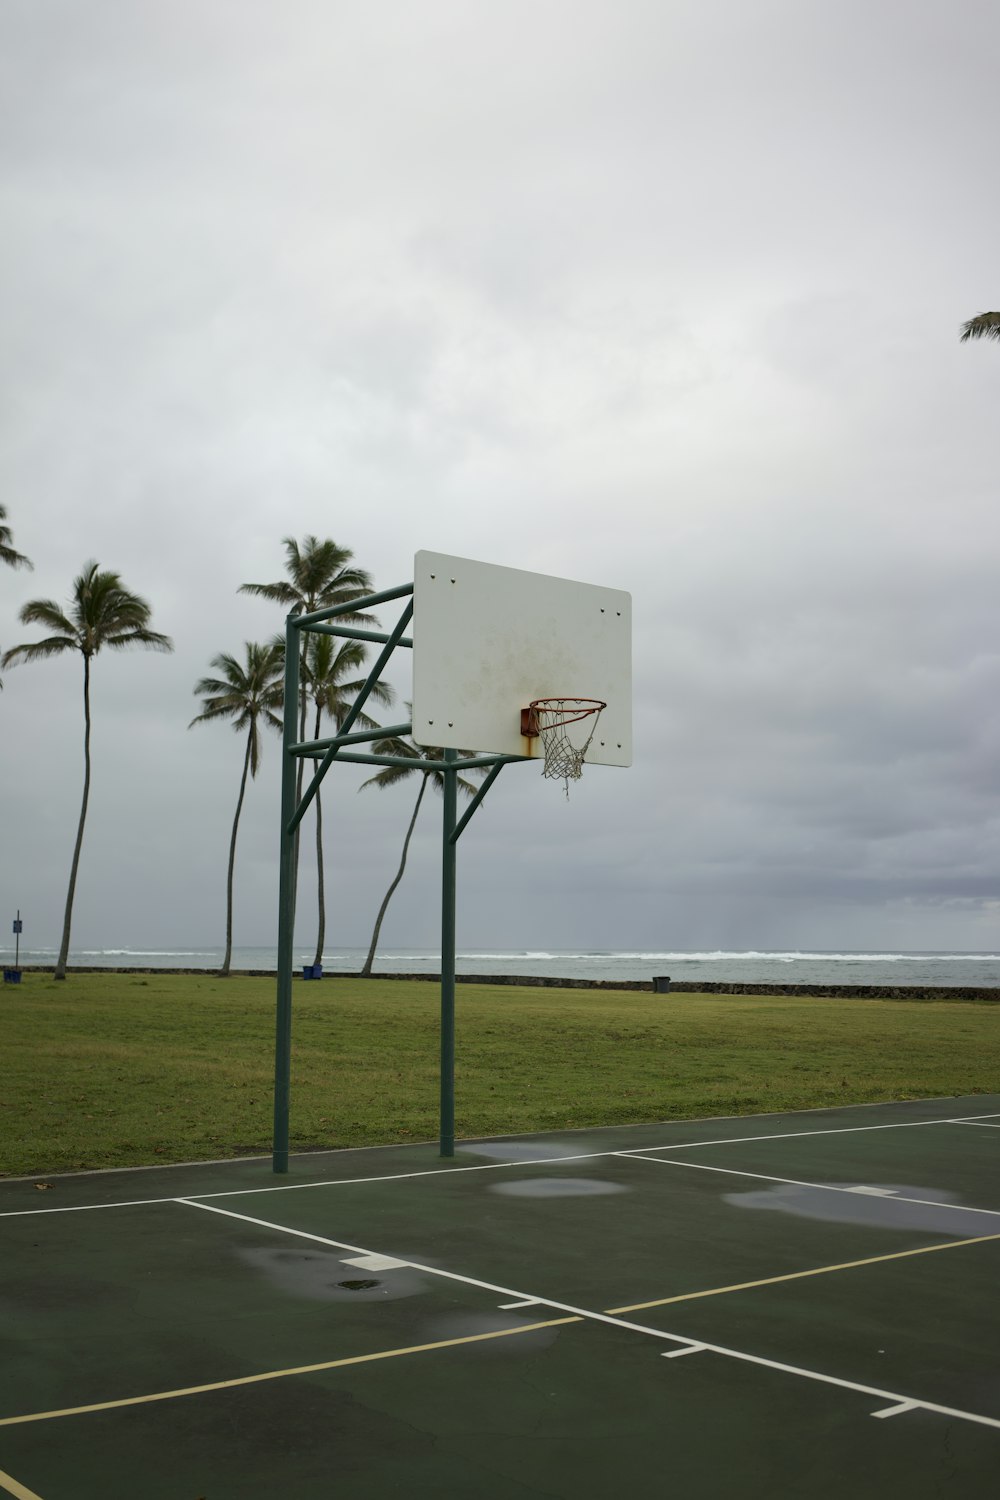 basketball hoop near palm trees under cloudy sky during daytime